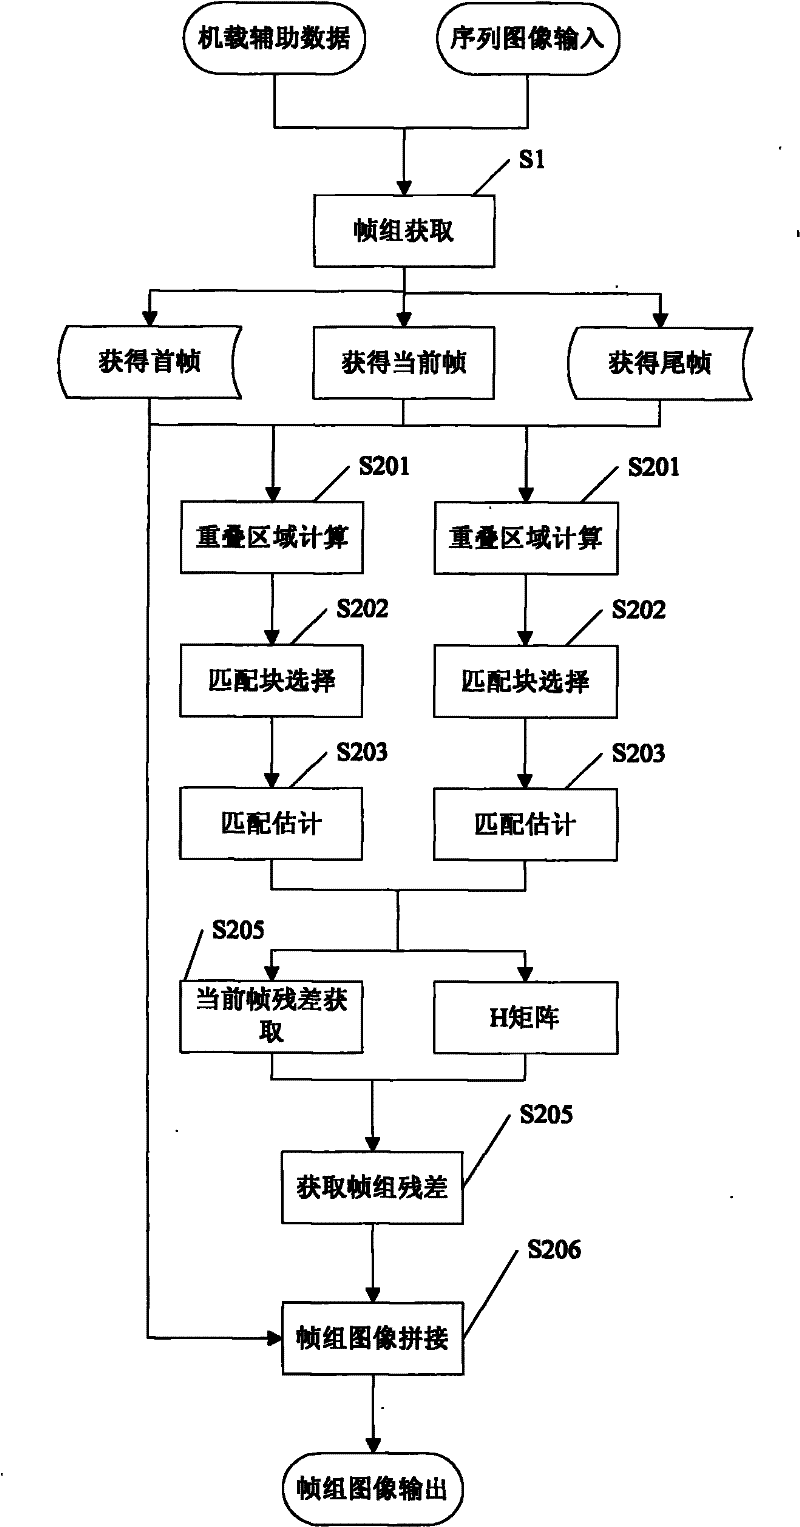 Method suitable for compressing sequence images of unmanned aerial vehicle